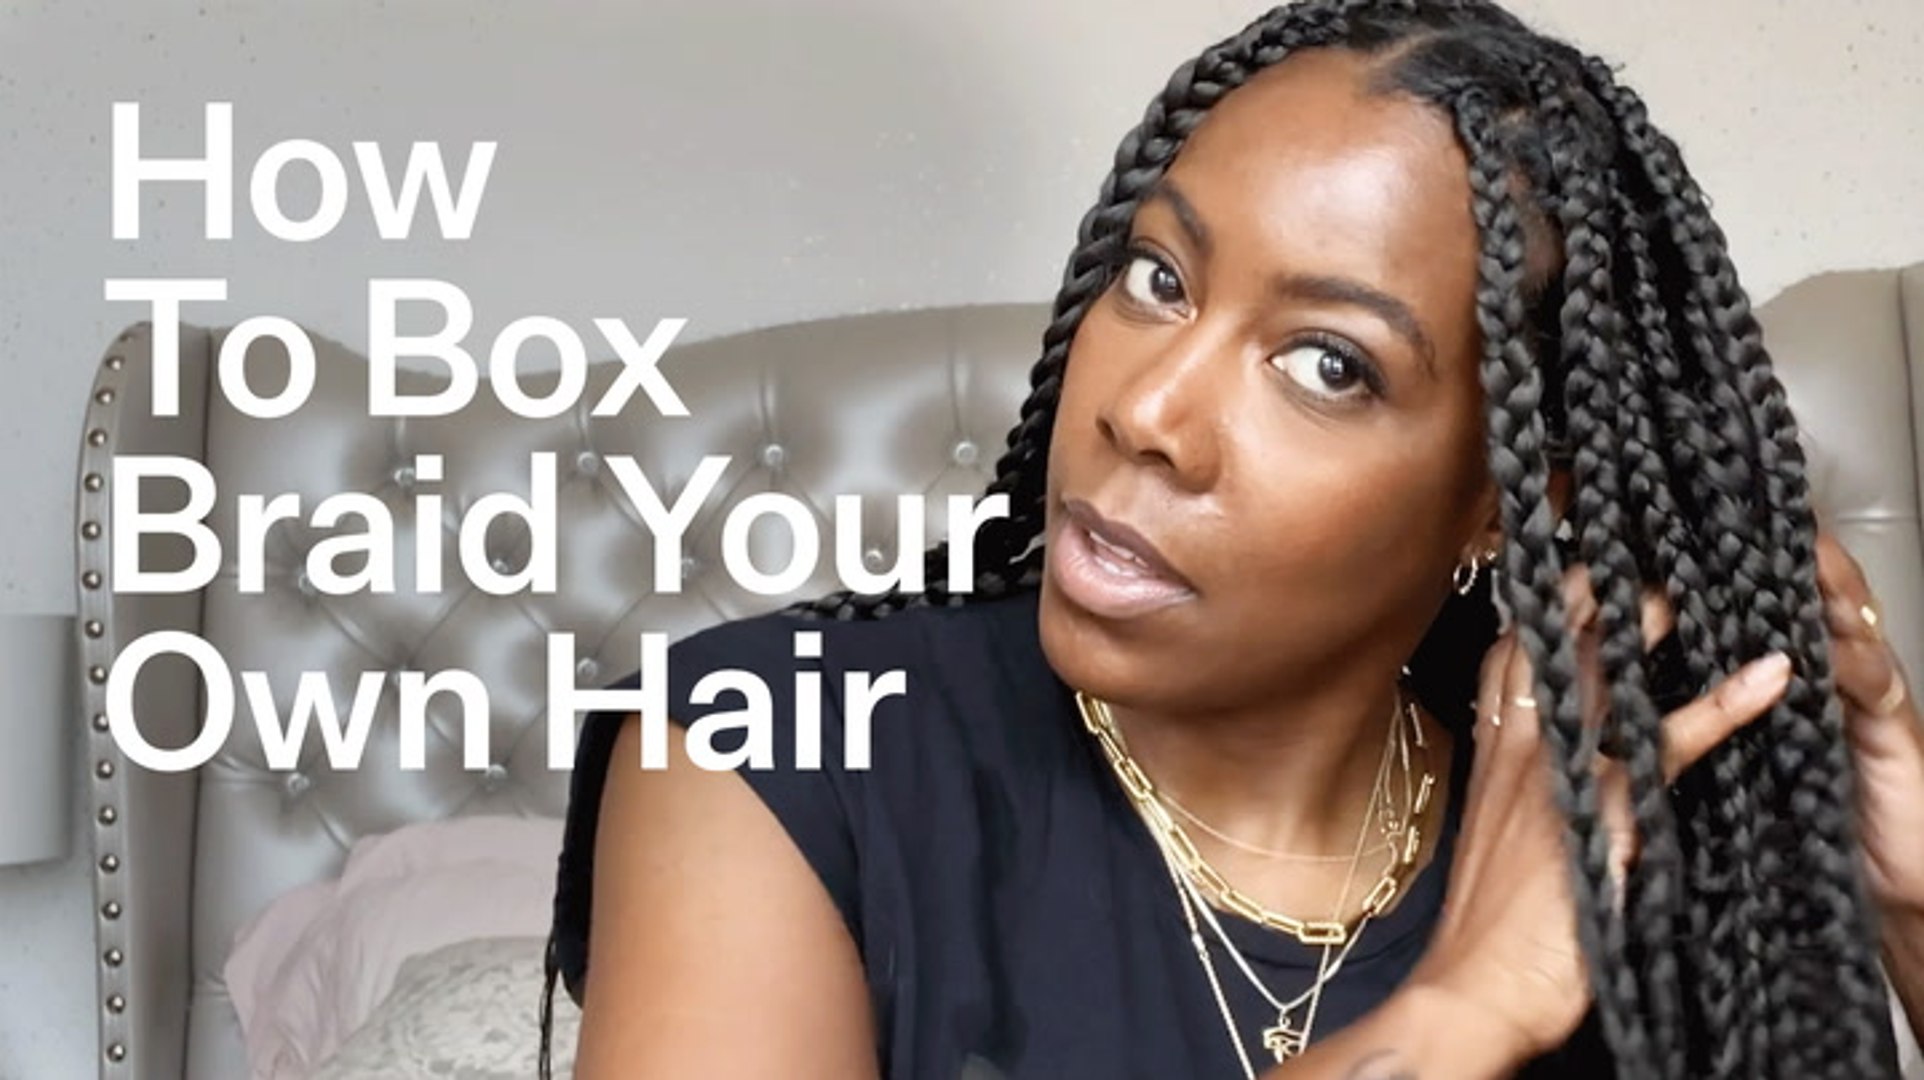 How To Box Braid Your Own Hair At Home For Beginners Bustle Video Dailymotion